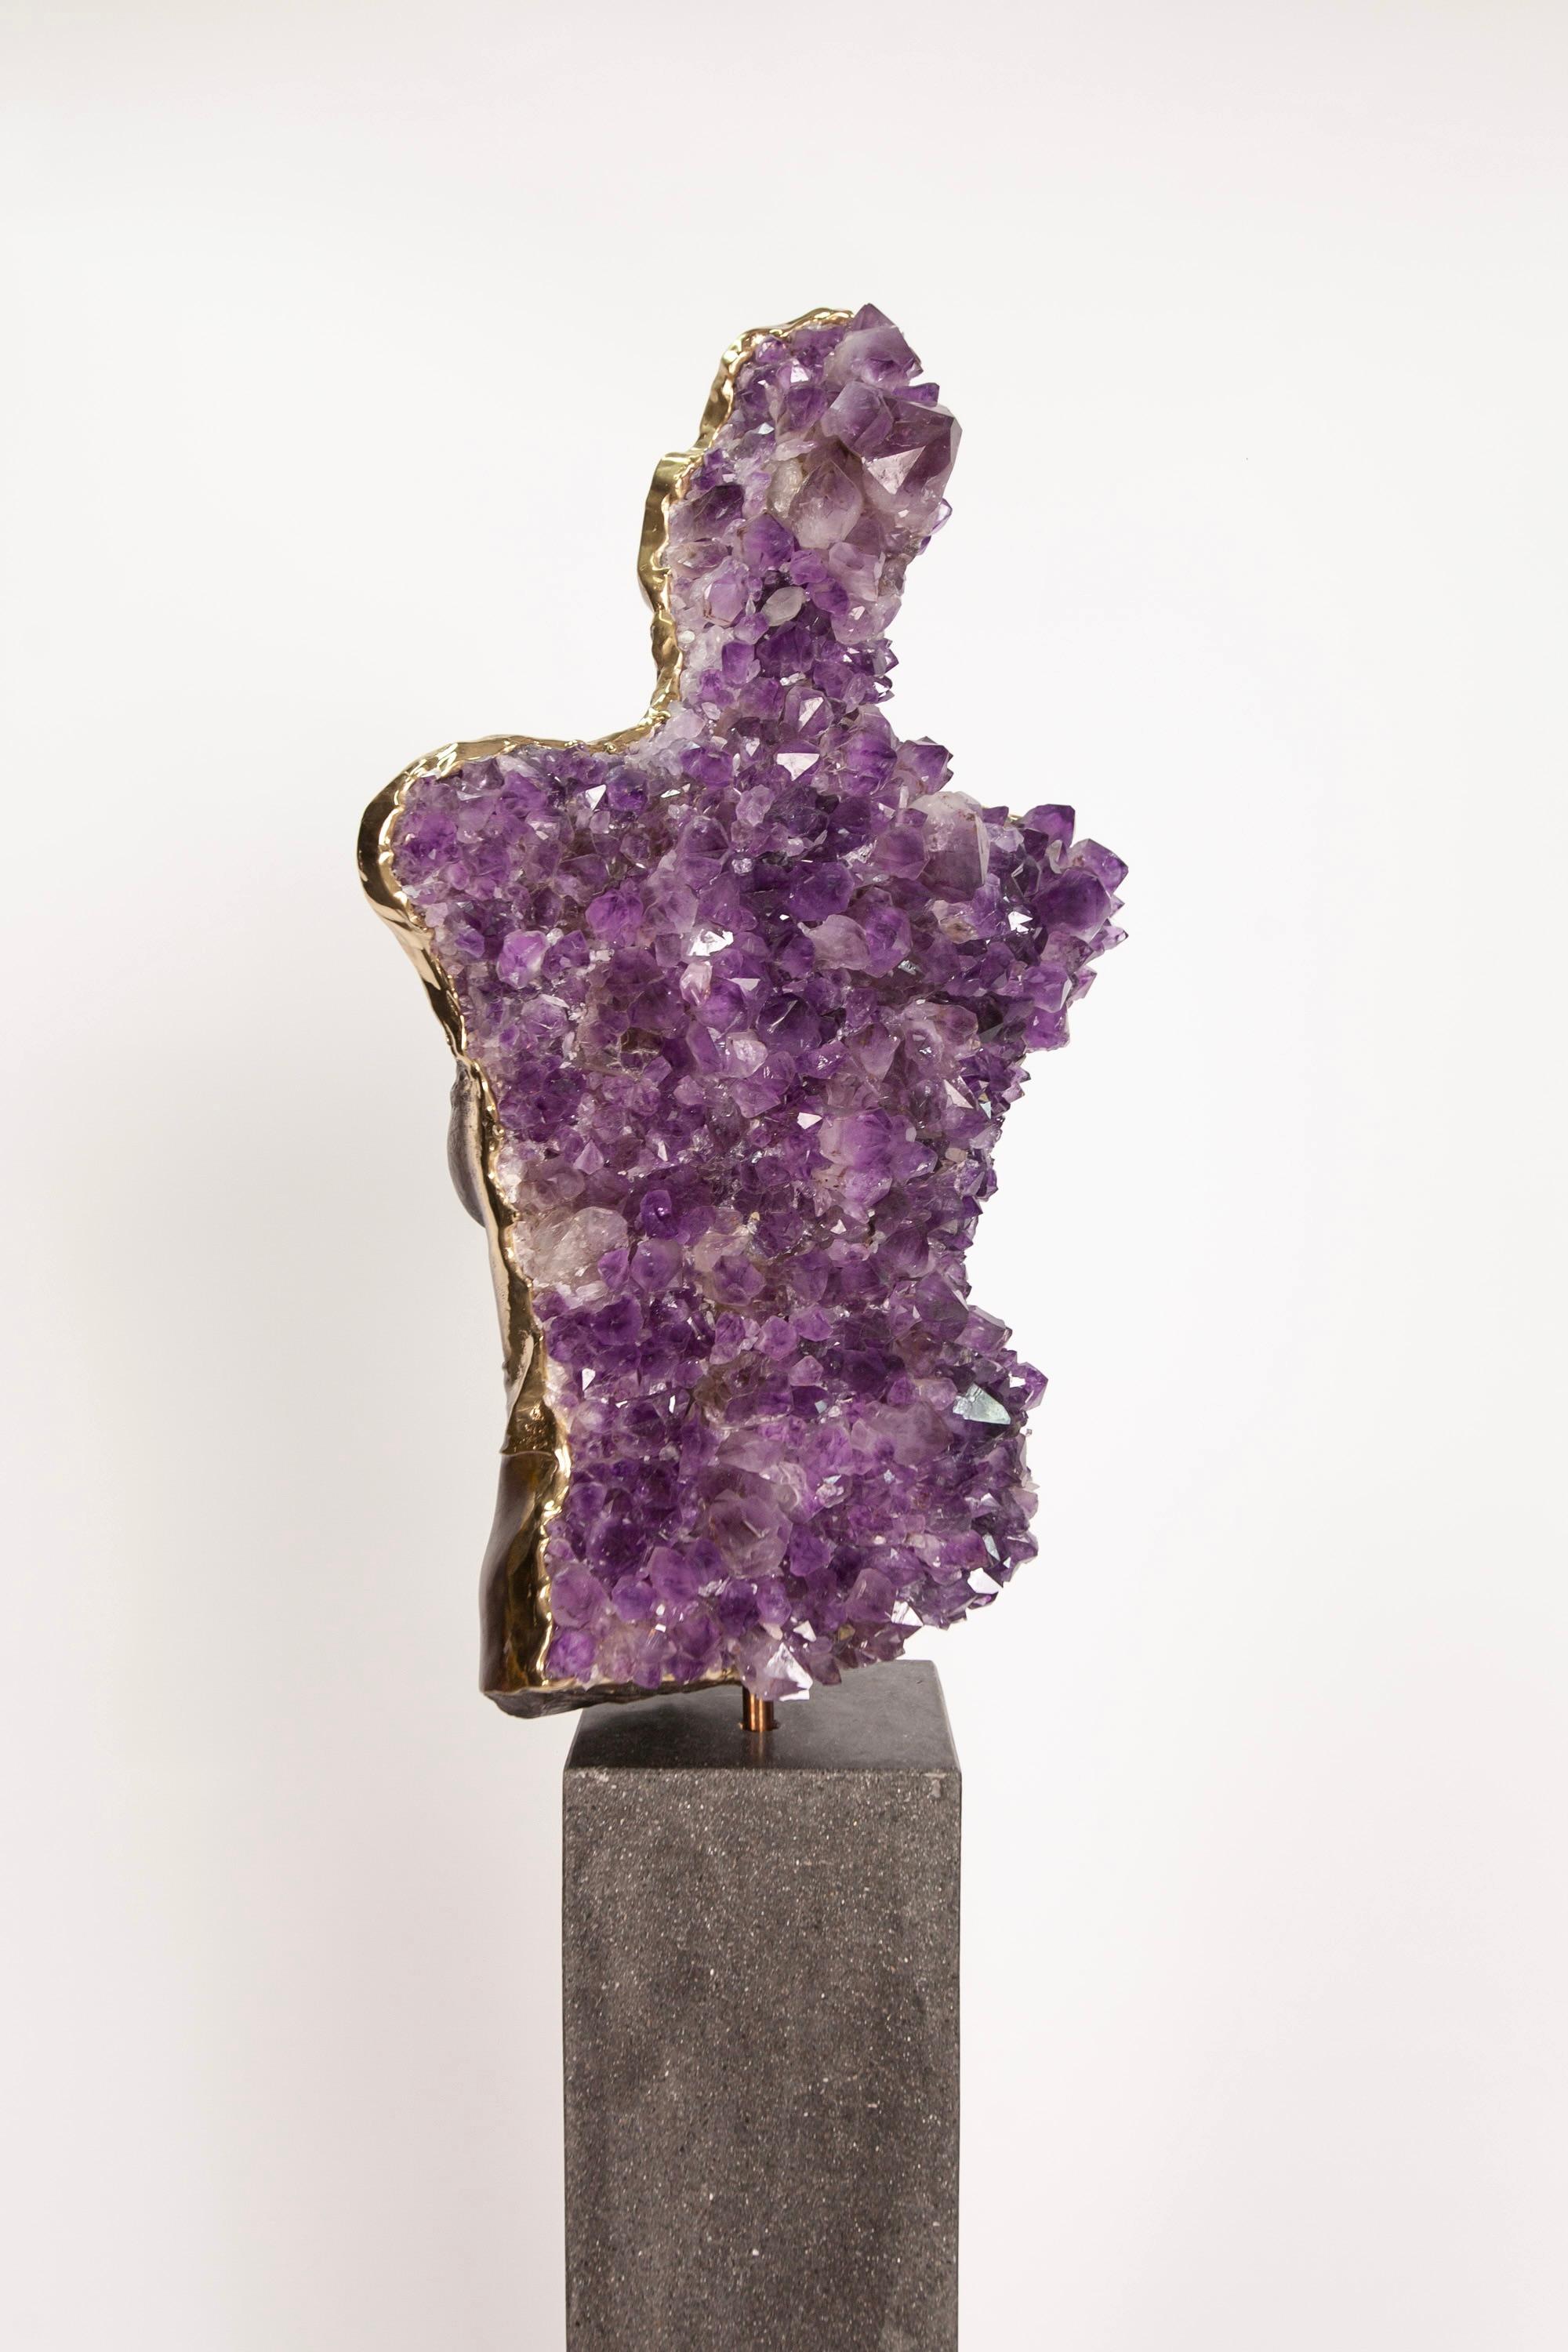 LIMINAL STATE  Amethyst crystals, bronze sculpture For Sale 6